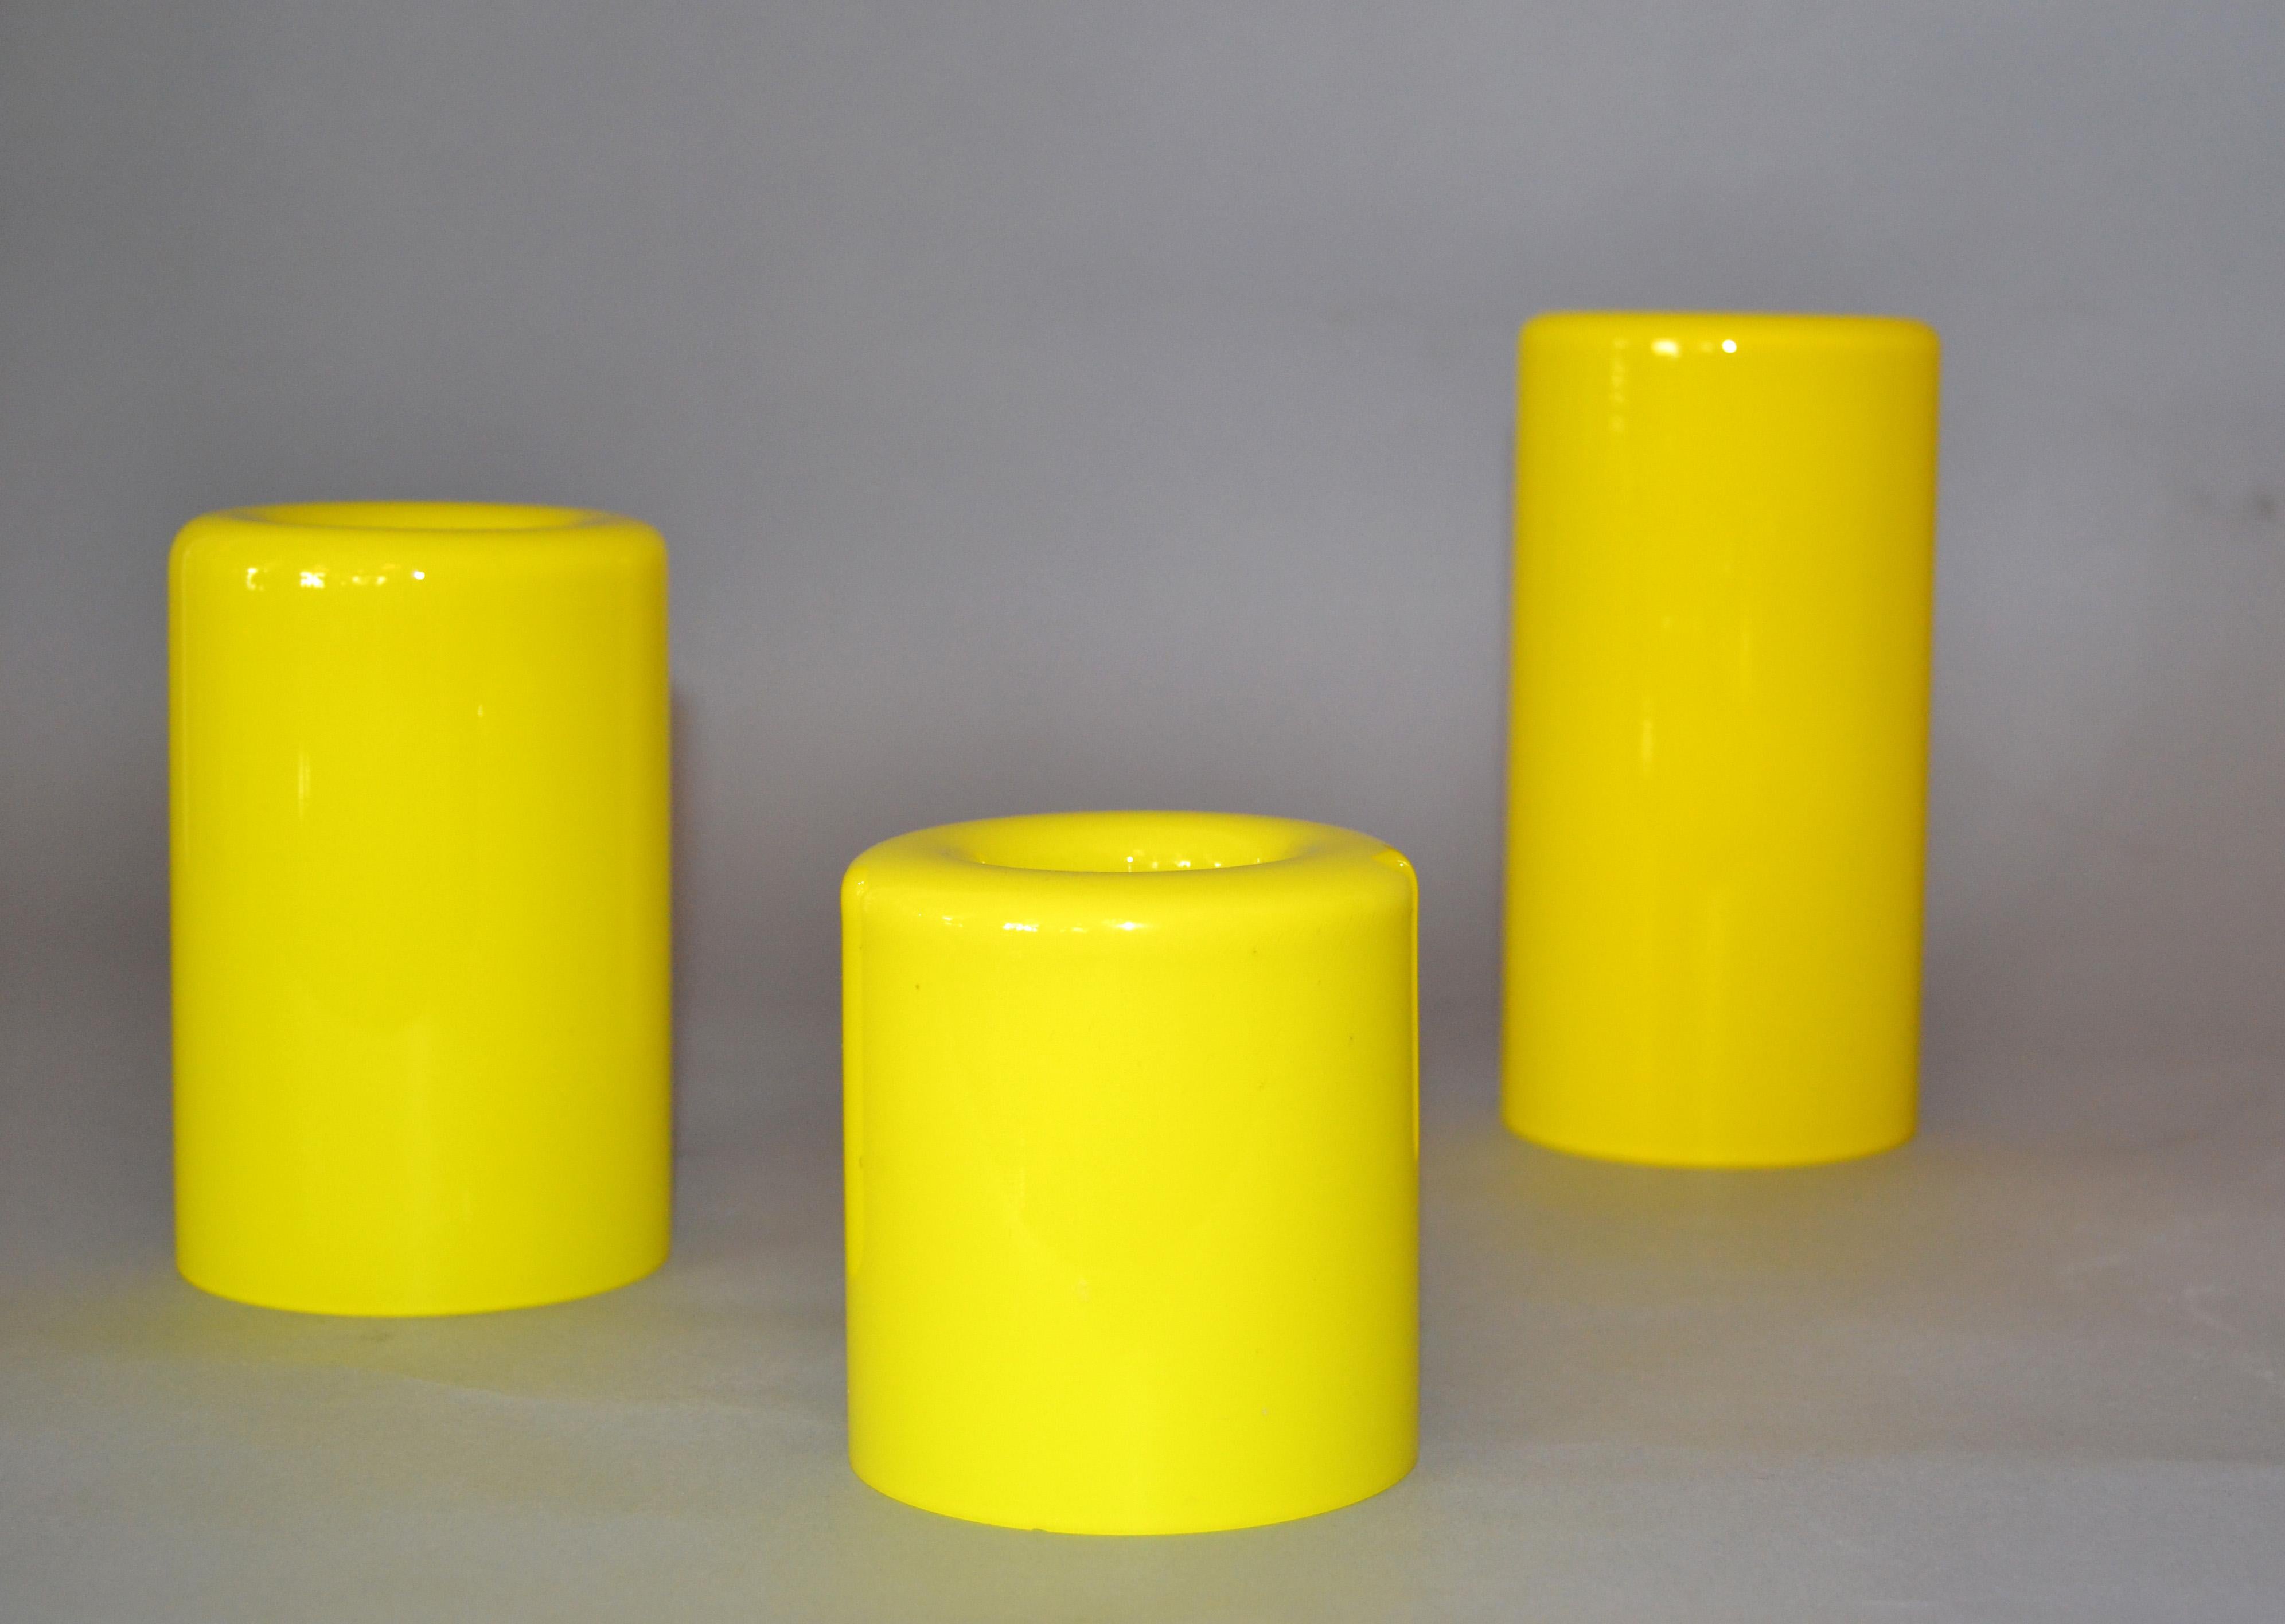 Set of 3 Orrefors yellow glass 'Eternell' candlestick holders, designed by Owe Elvén.
All 3 have the original foil label.
The tallest candleholder measures 6 1/4 inches in height, the medium candleholder measures 4 3/4 inches and the smallest